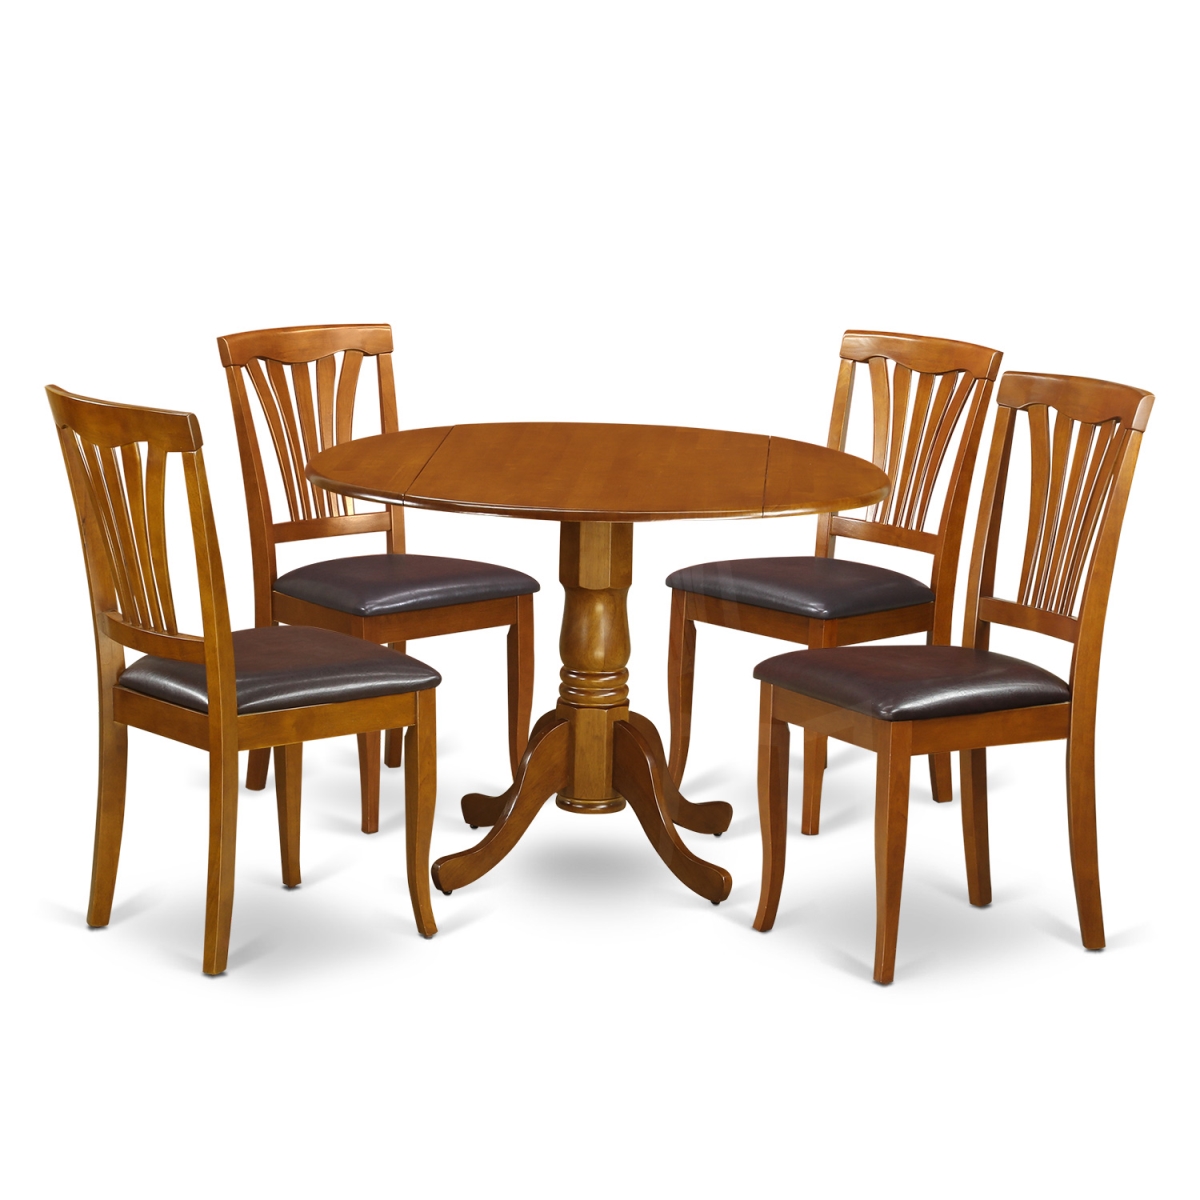 Picture of East West Furniture DLAV5-SBR-LC Dining Table Set - Dining Room Table & 2 Chairs - 3 Piece